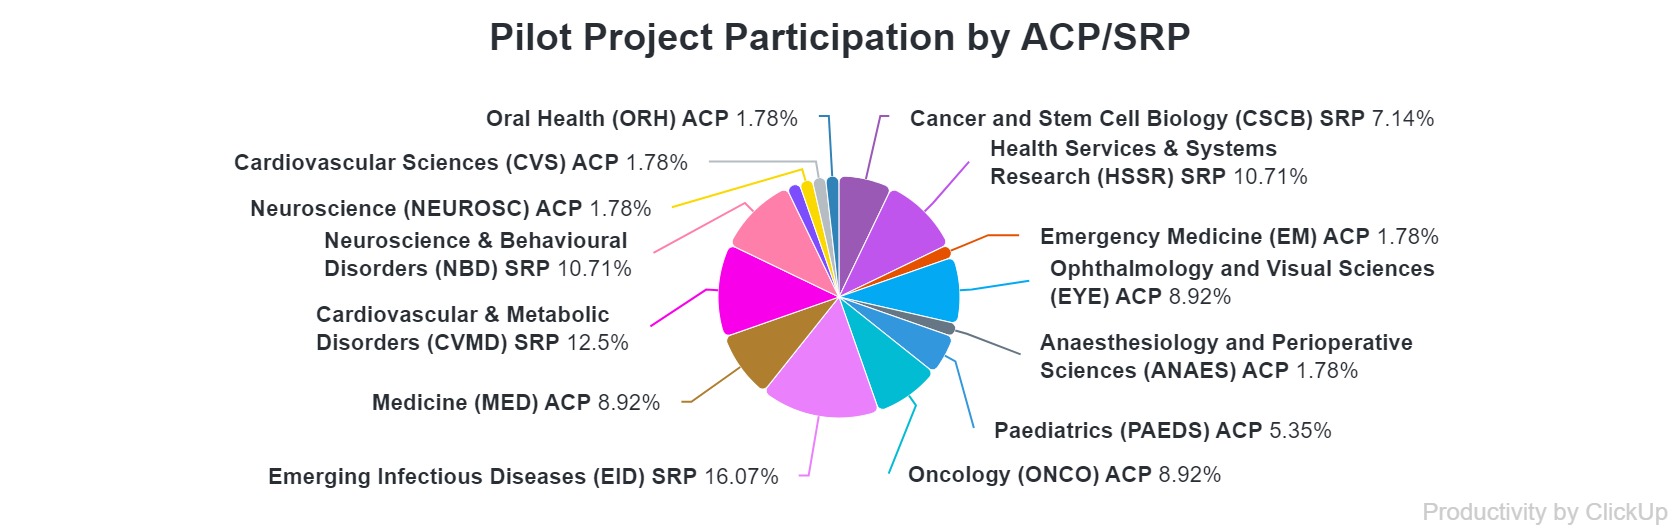 pp participation by acpsrp